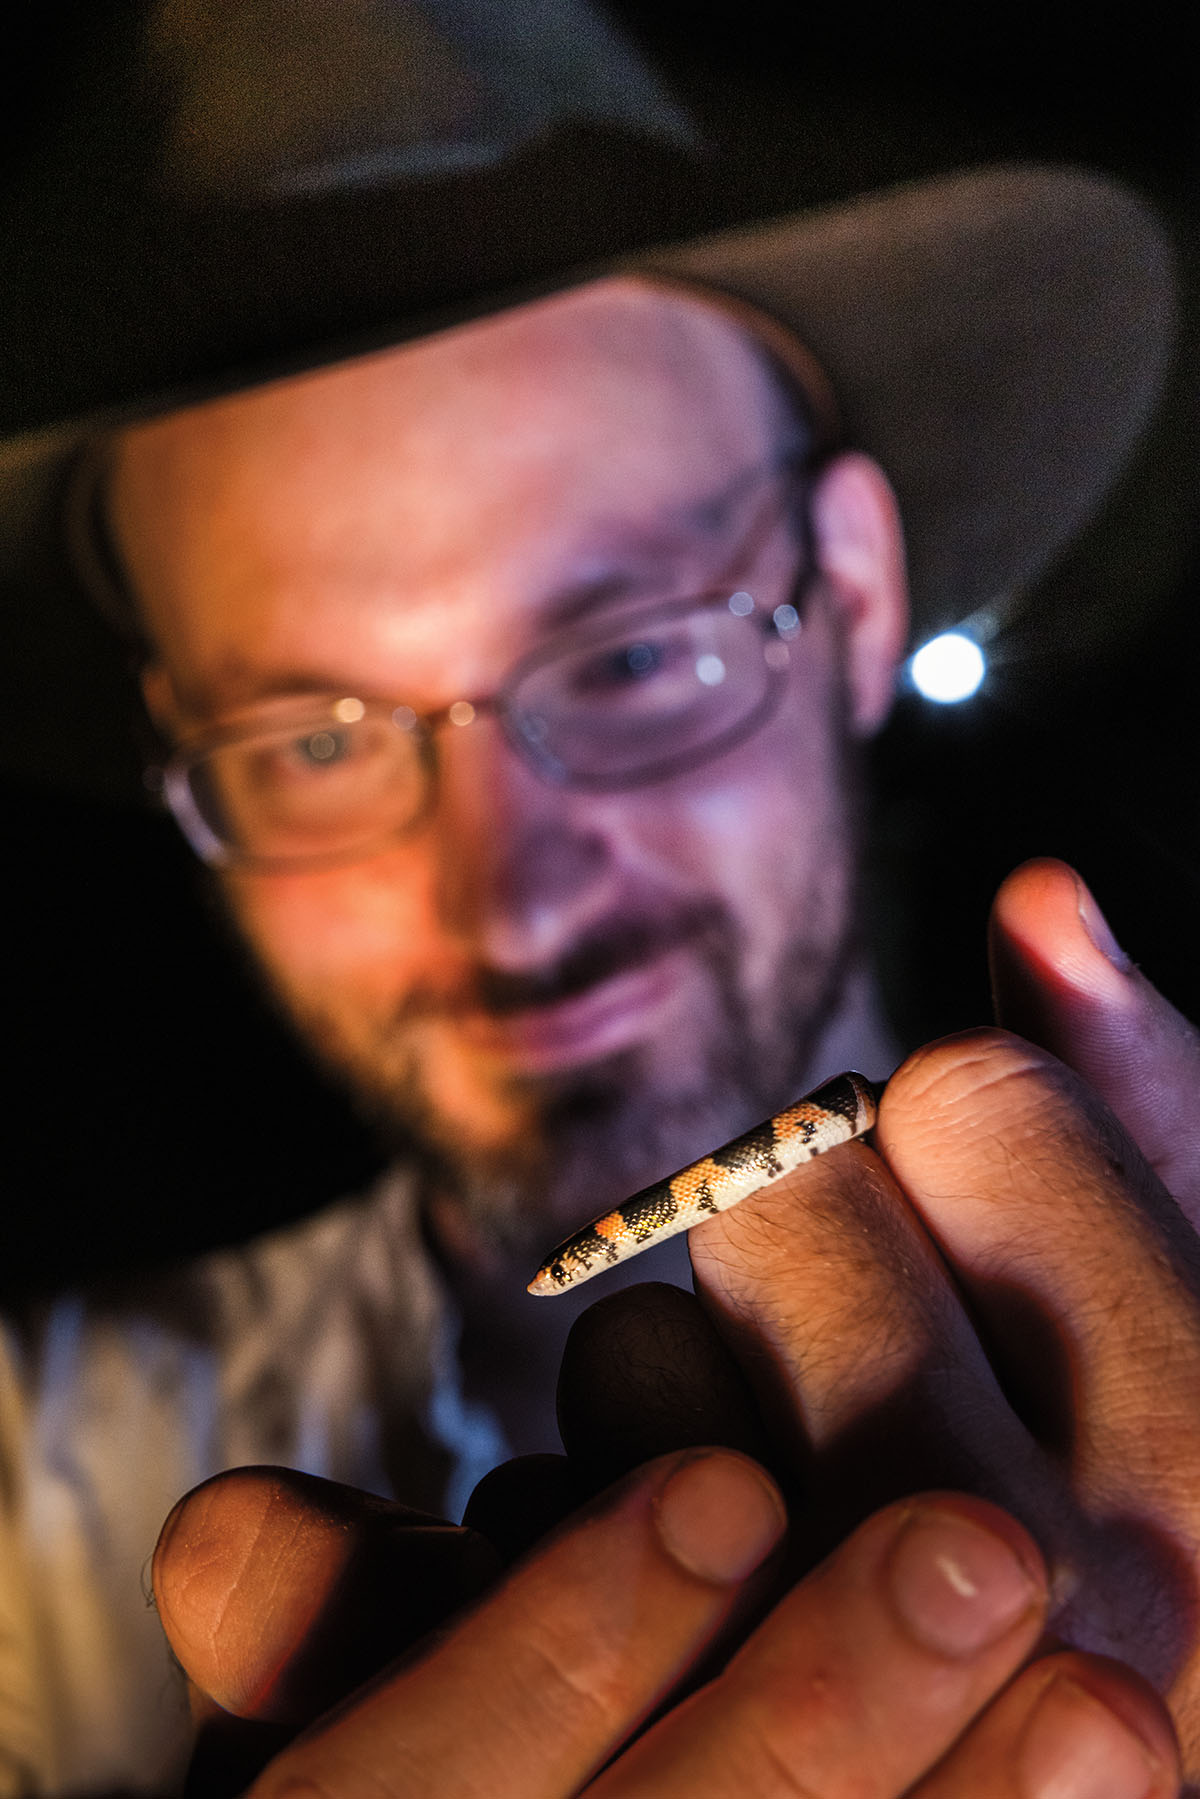 A man with glasses smiles as he looks at a small reptile